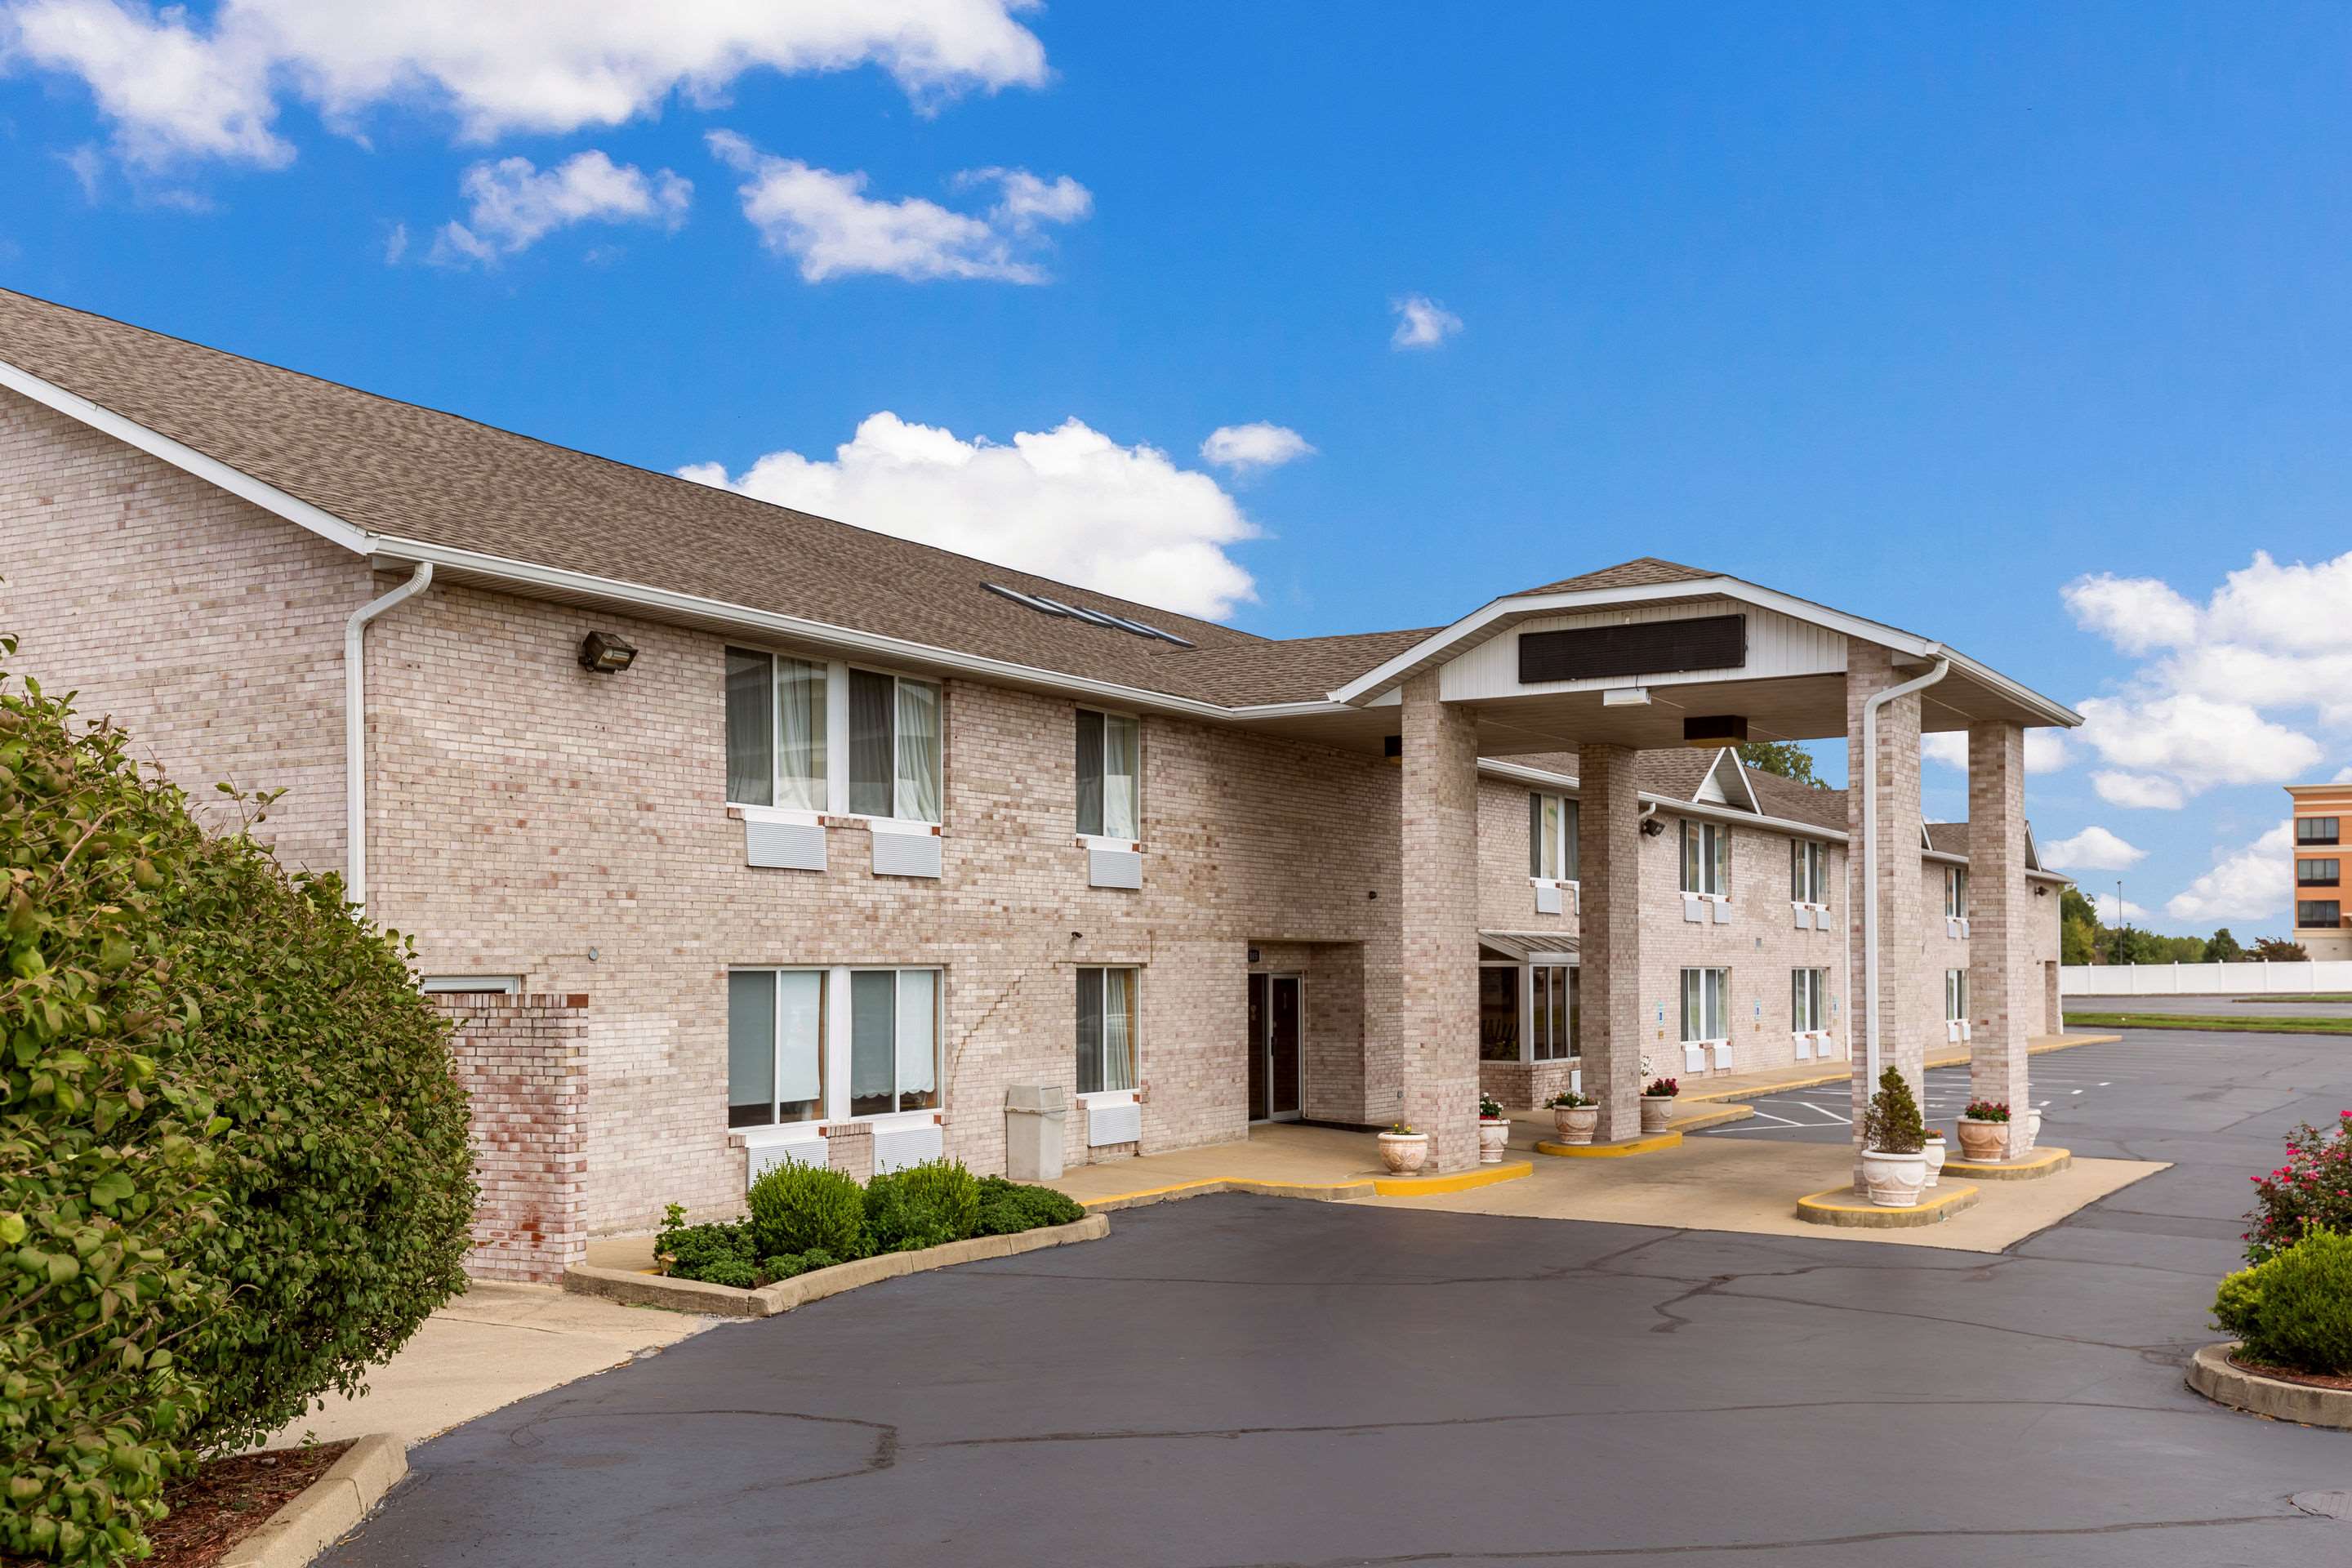 Econo Lodge Inn & Suites in Fairview Heights, IL (Hotels & Motels) - 618-624-3636 | 0